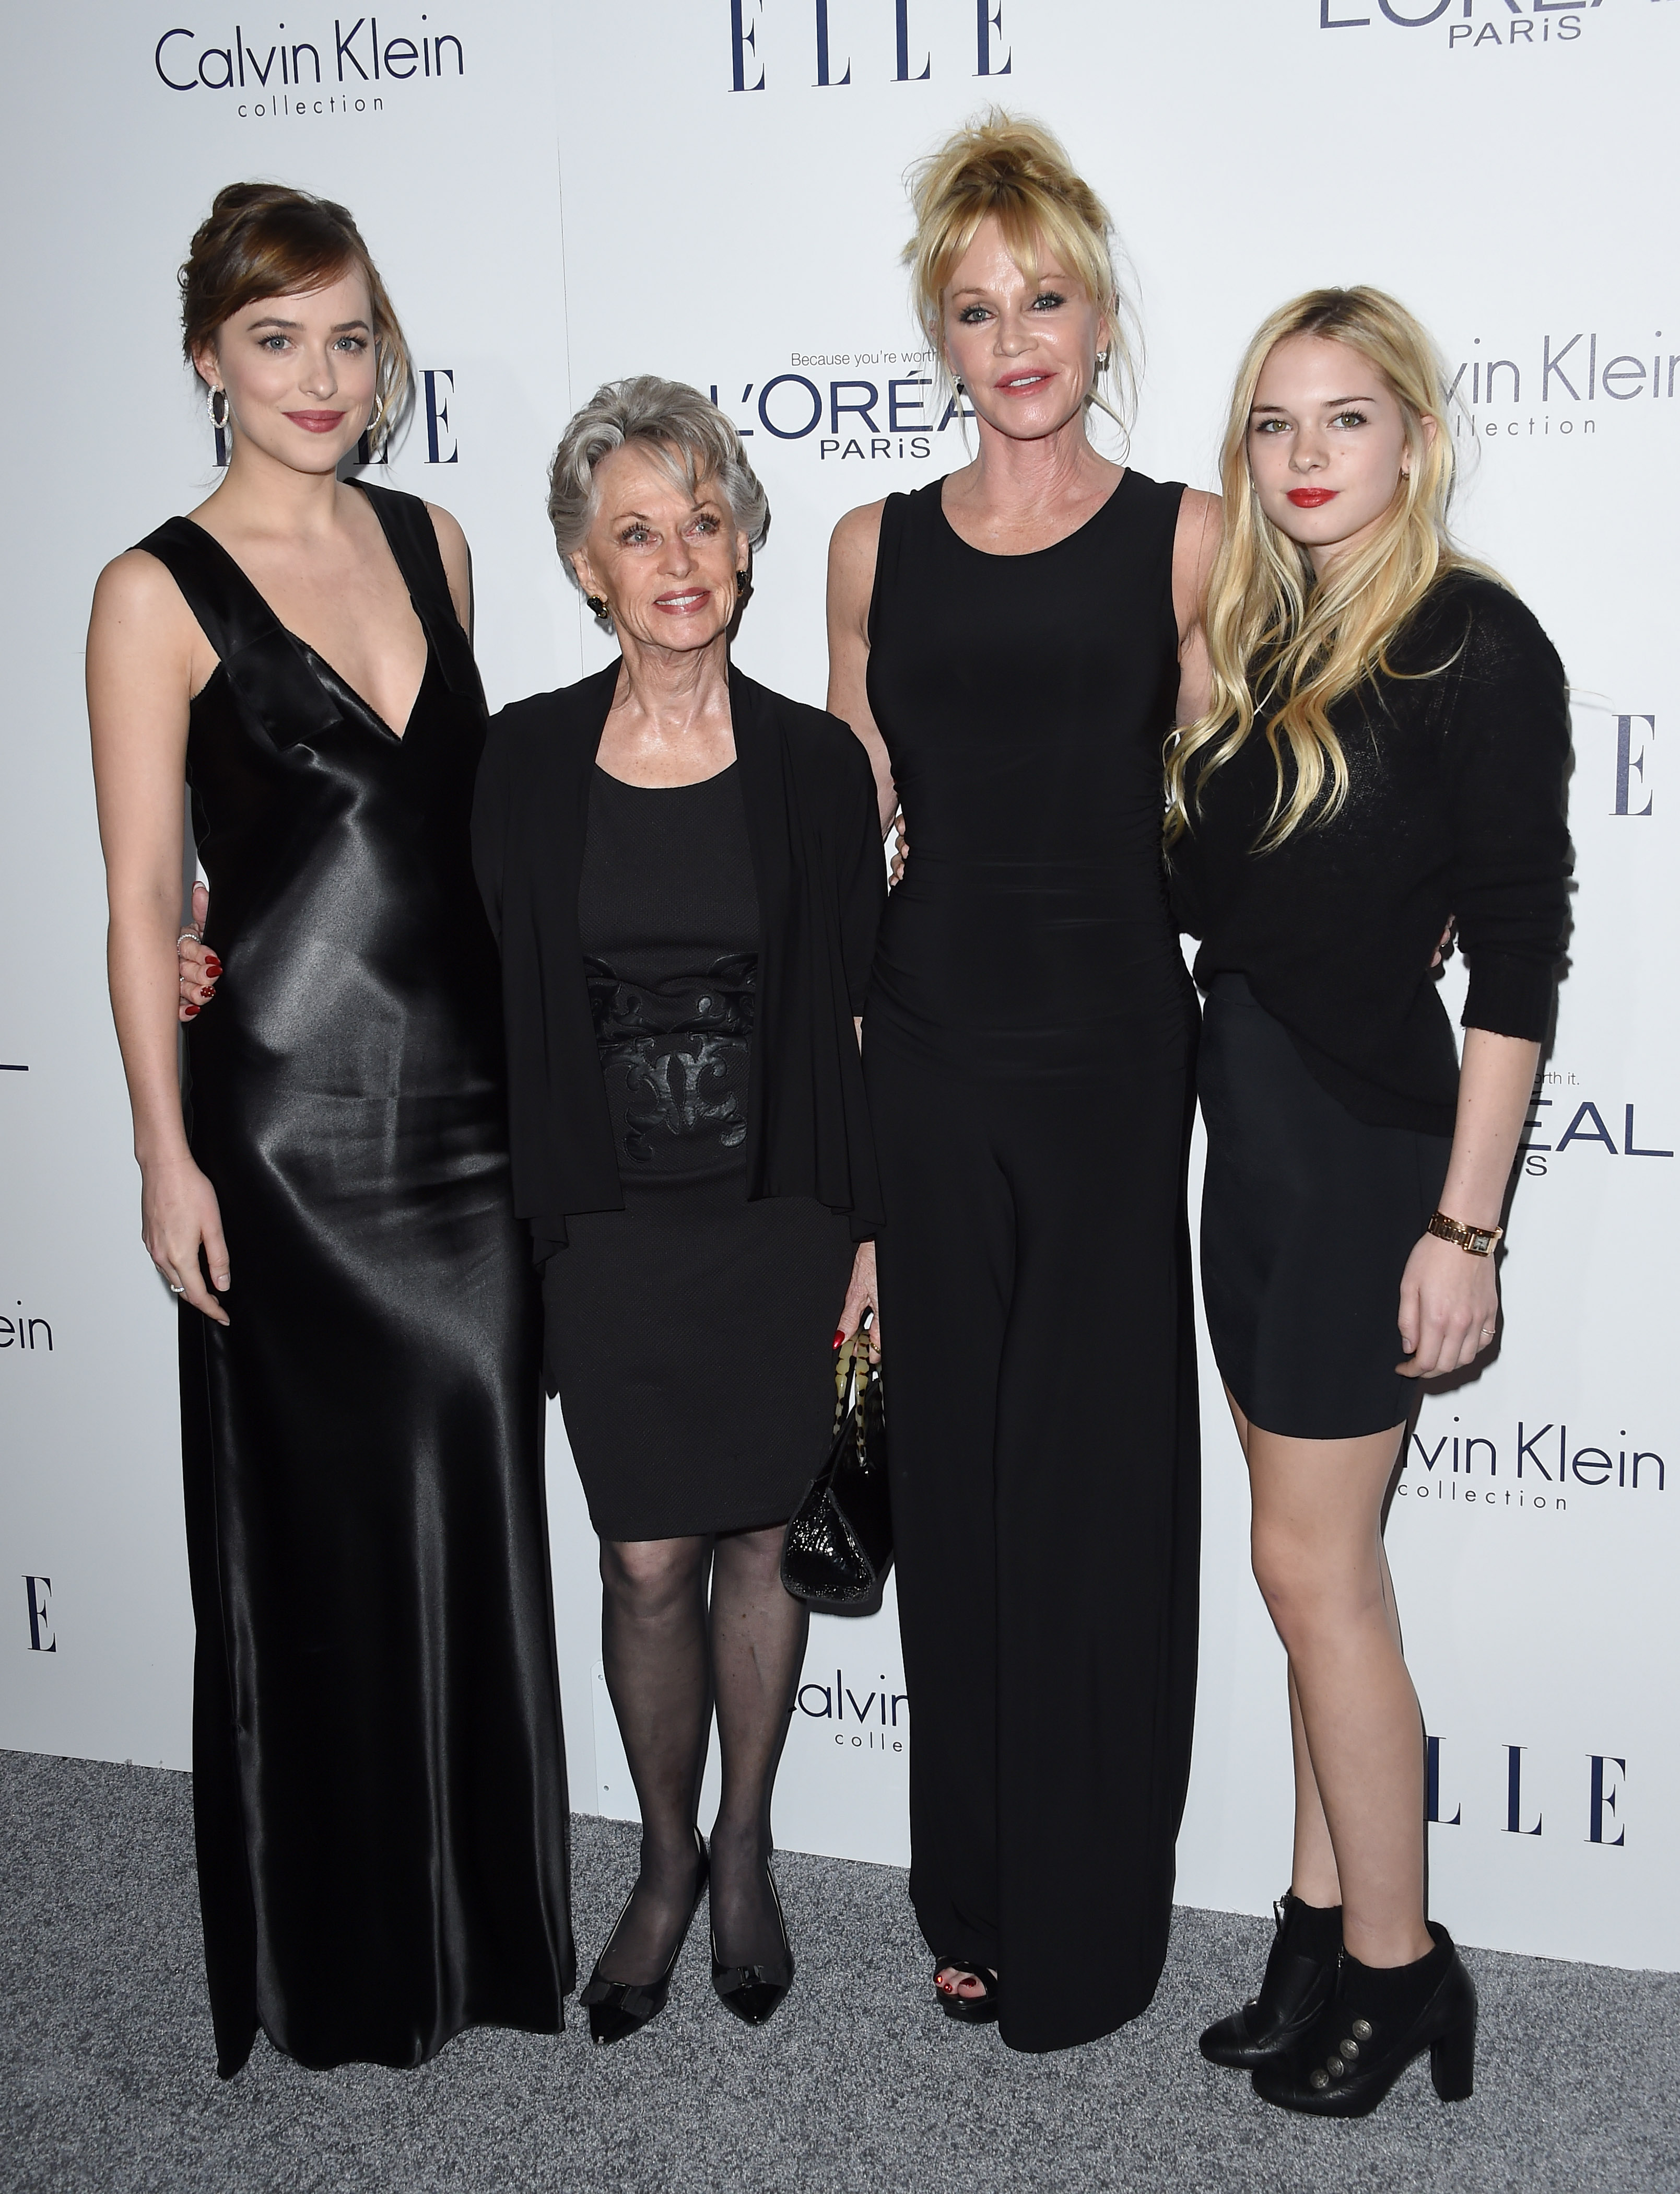 Dakota Johnson, Tippi Hedren, Melanie Griffith and Stella Banderas at the 22nd Annual ELLE Women In Hollywood Awards in Los Angeles, California on October 19, 2015 | Source: Getty Images